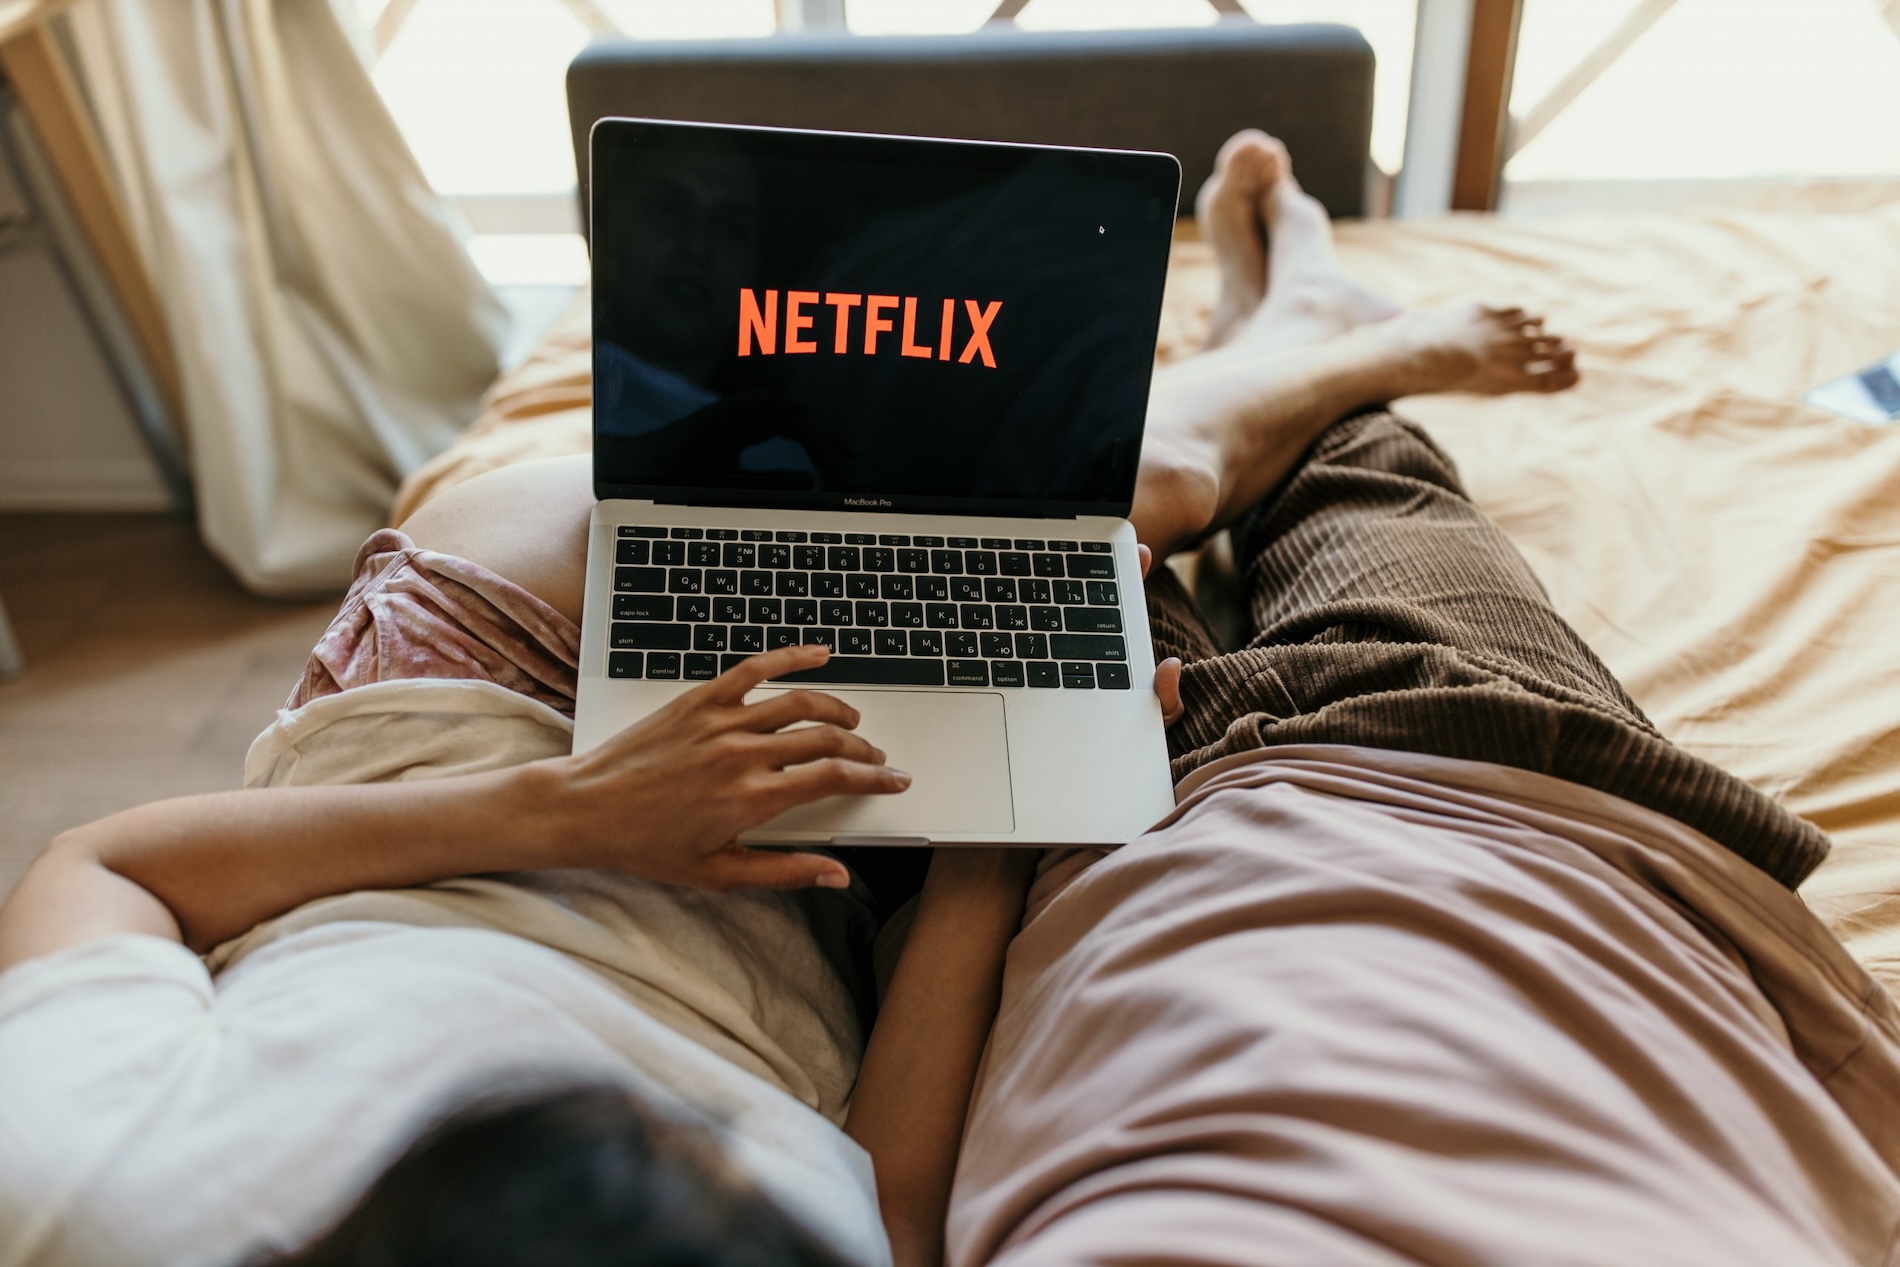 Two people watching Netflix on a laptop in bed